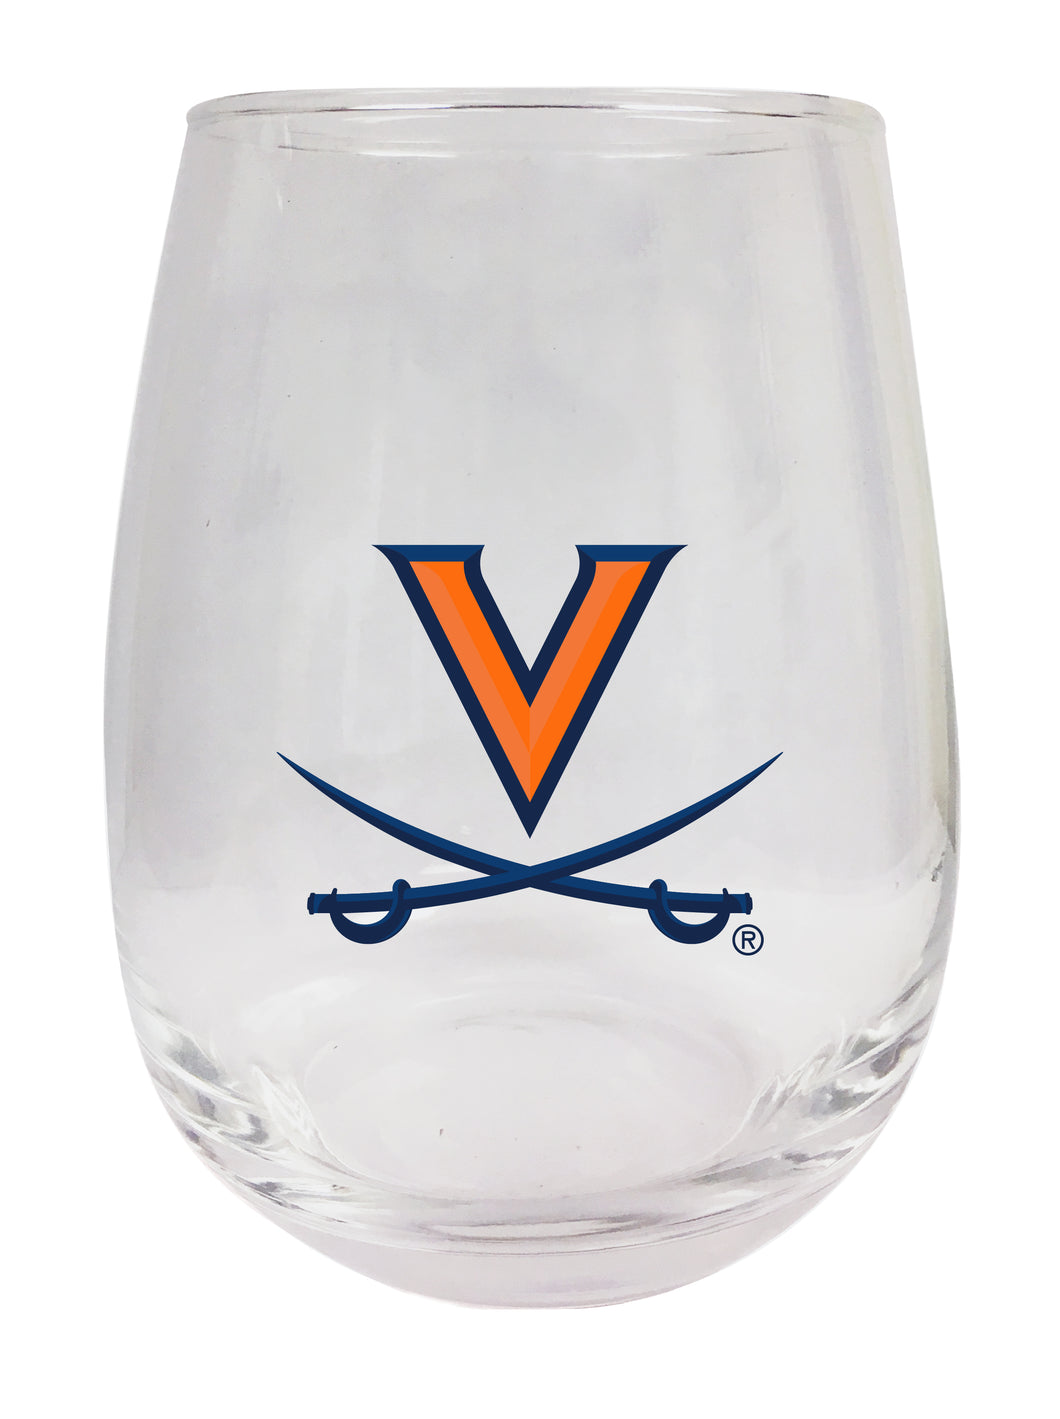 Virginia Cavaliers Stemless Wine Glass - 9 oz. | Officially Licensed NCAA Merchandise